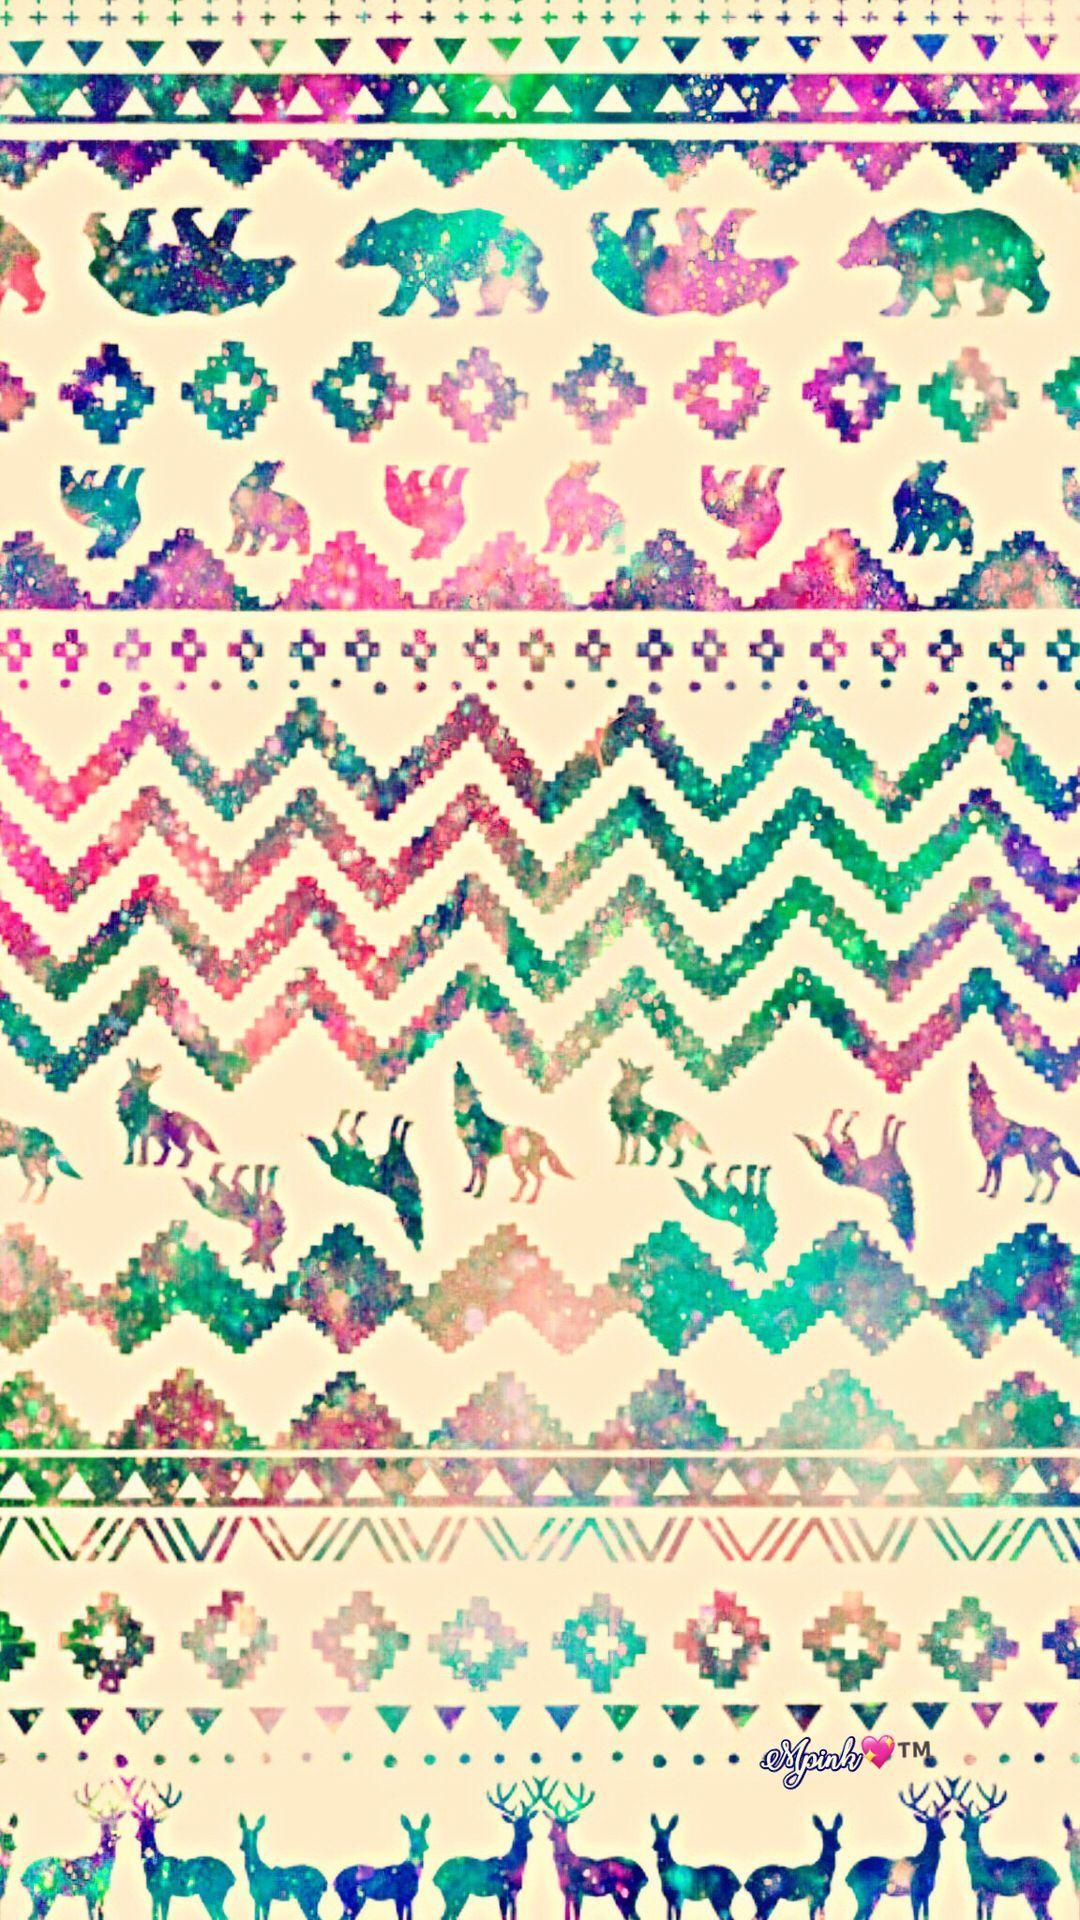 Vintage Wolf Pattern Galaxy Wallpaper #androidwallpaper